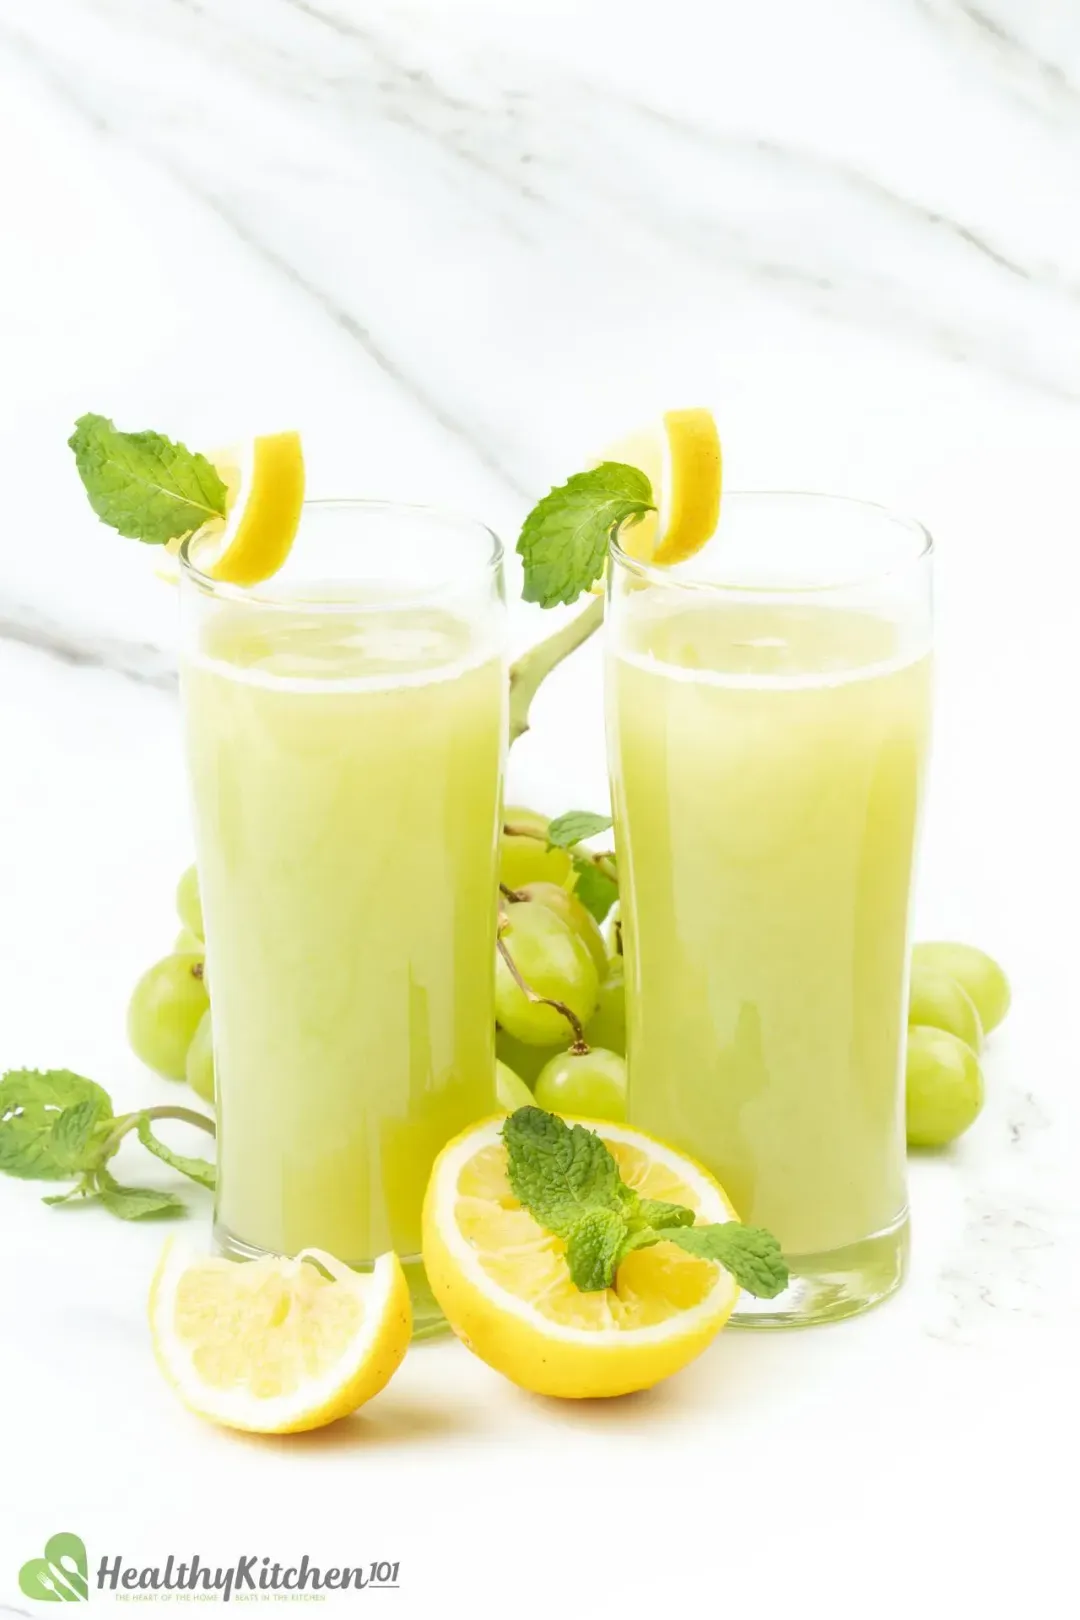 Two glasses of green grape juice placed side by side surrounded by some lemons and green grapes